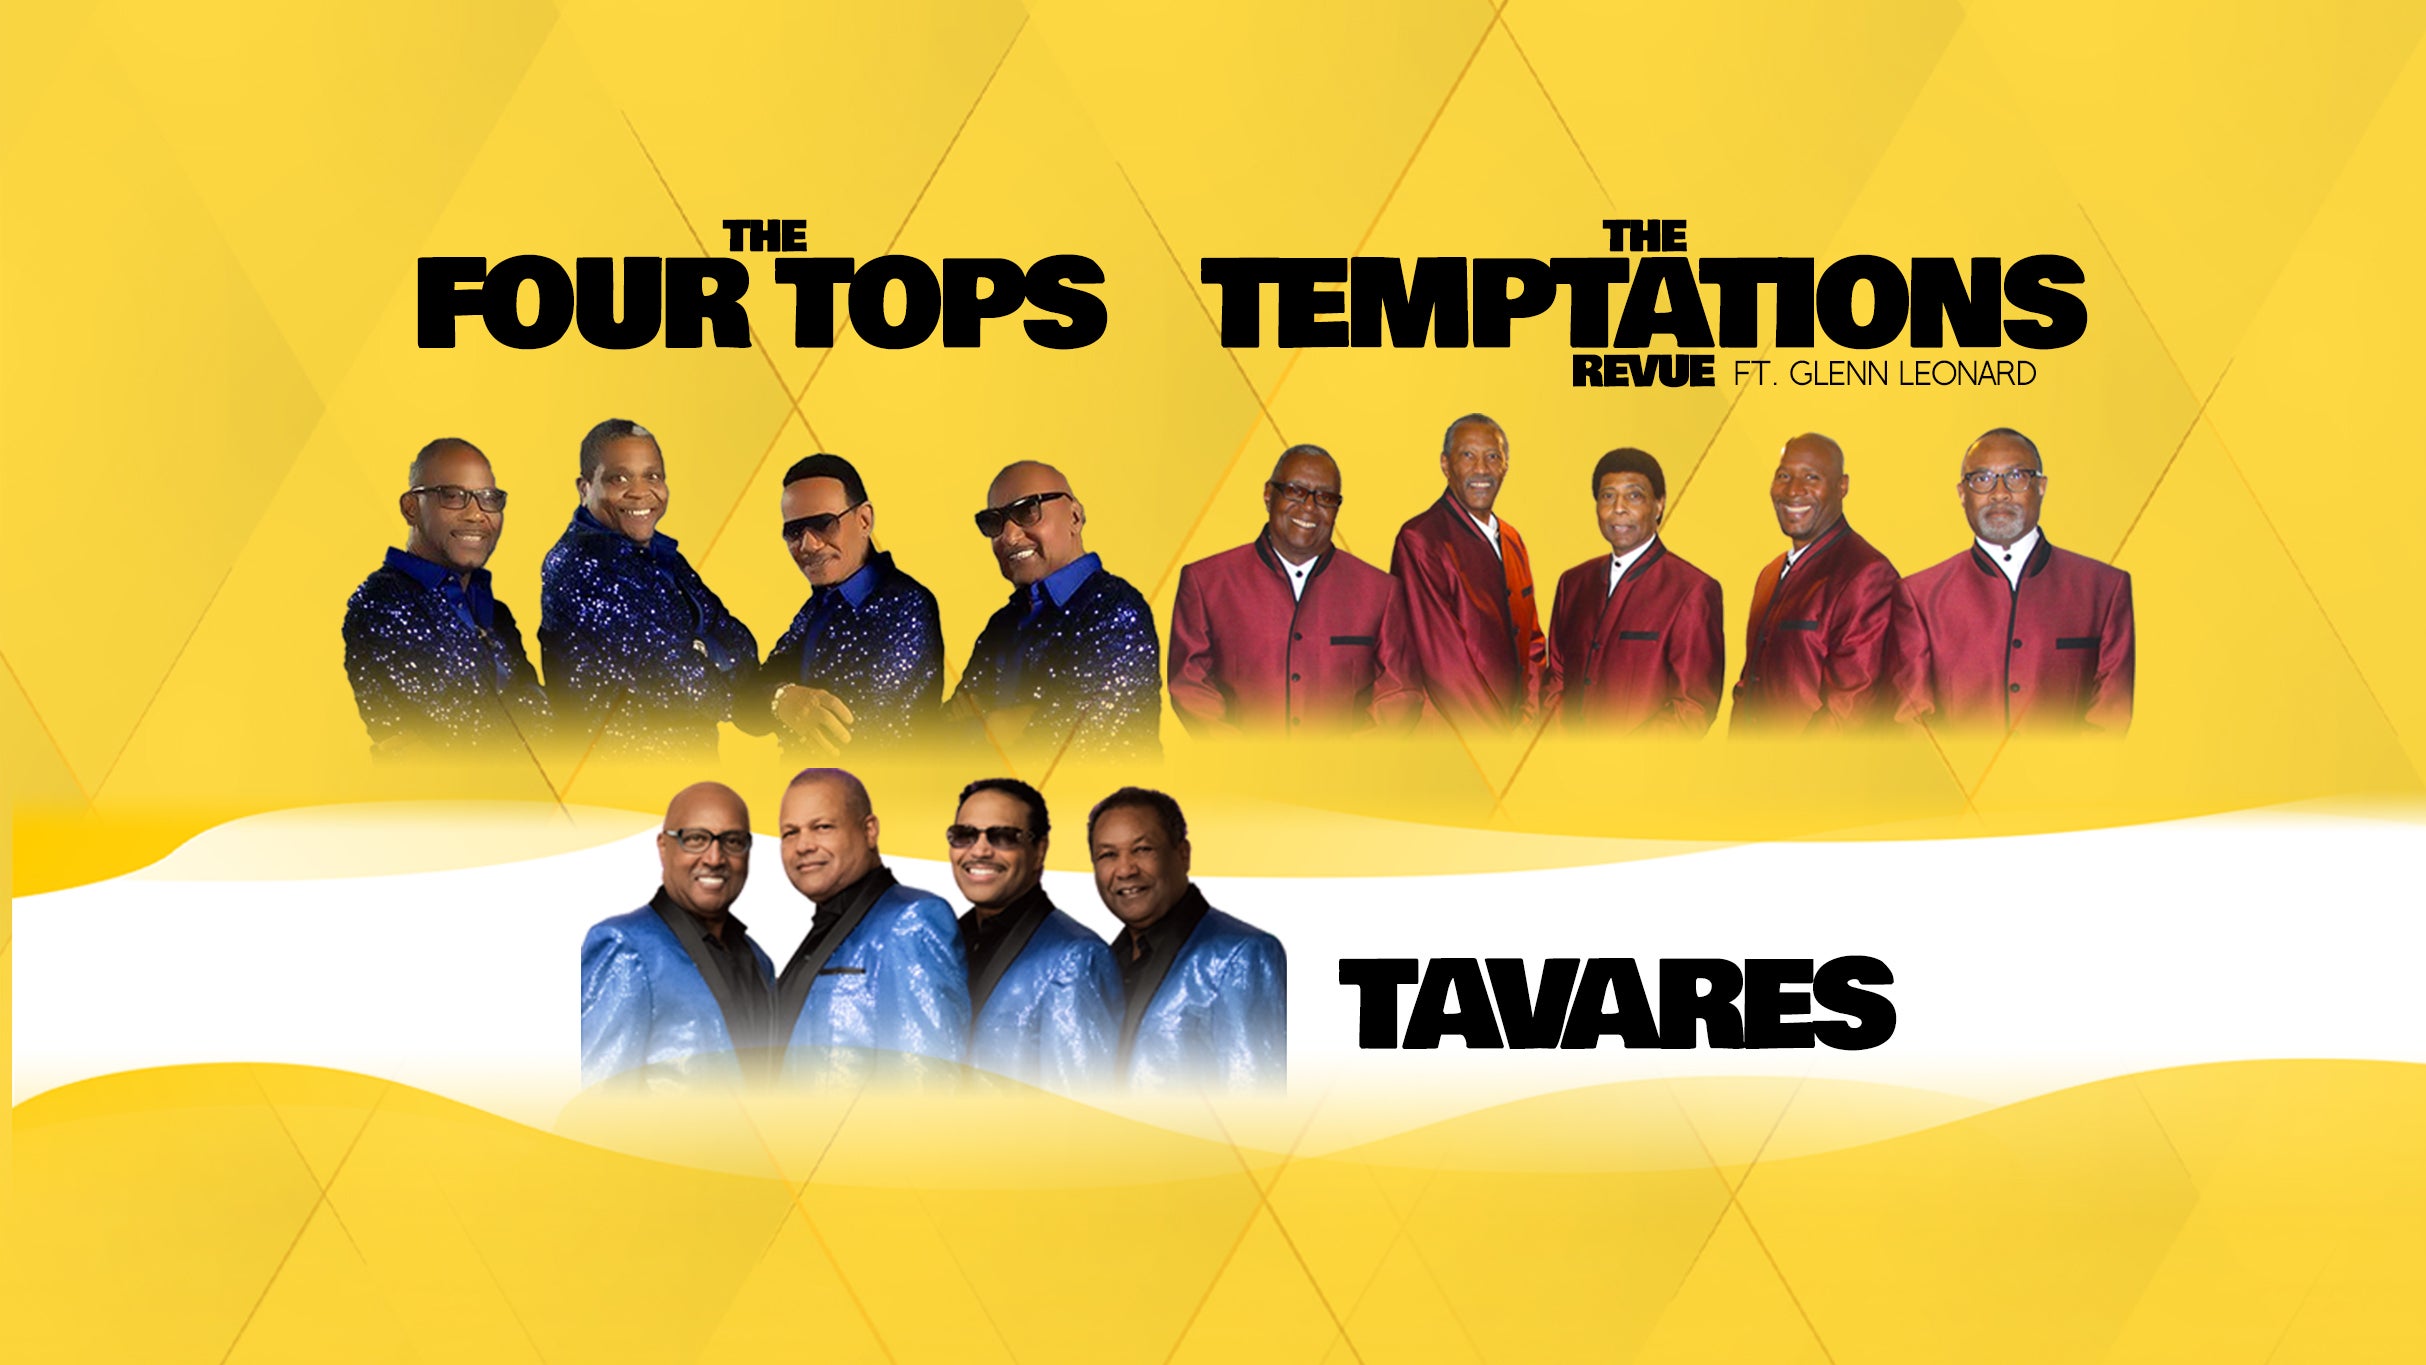 The Four Tops/ The Temptations revue ft. Glen Leonard/ Tavares presale password for musical tickets in Hull,  (Connexin Live)